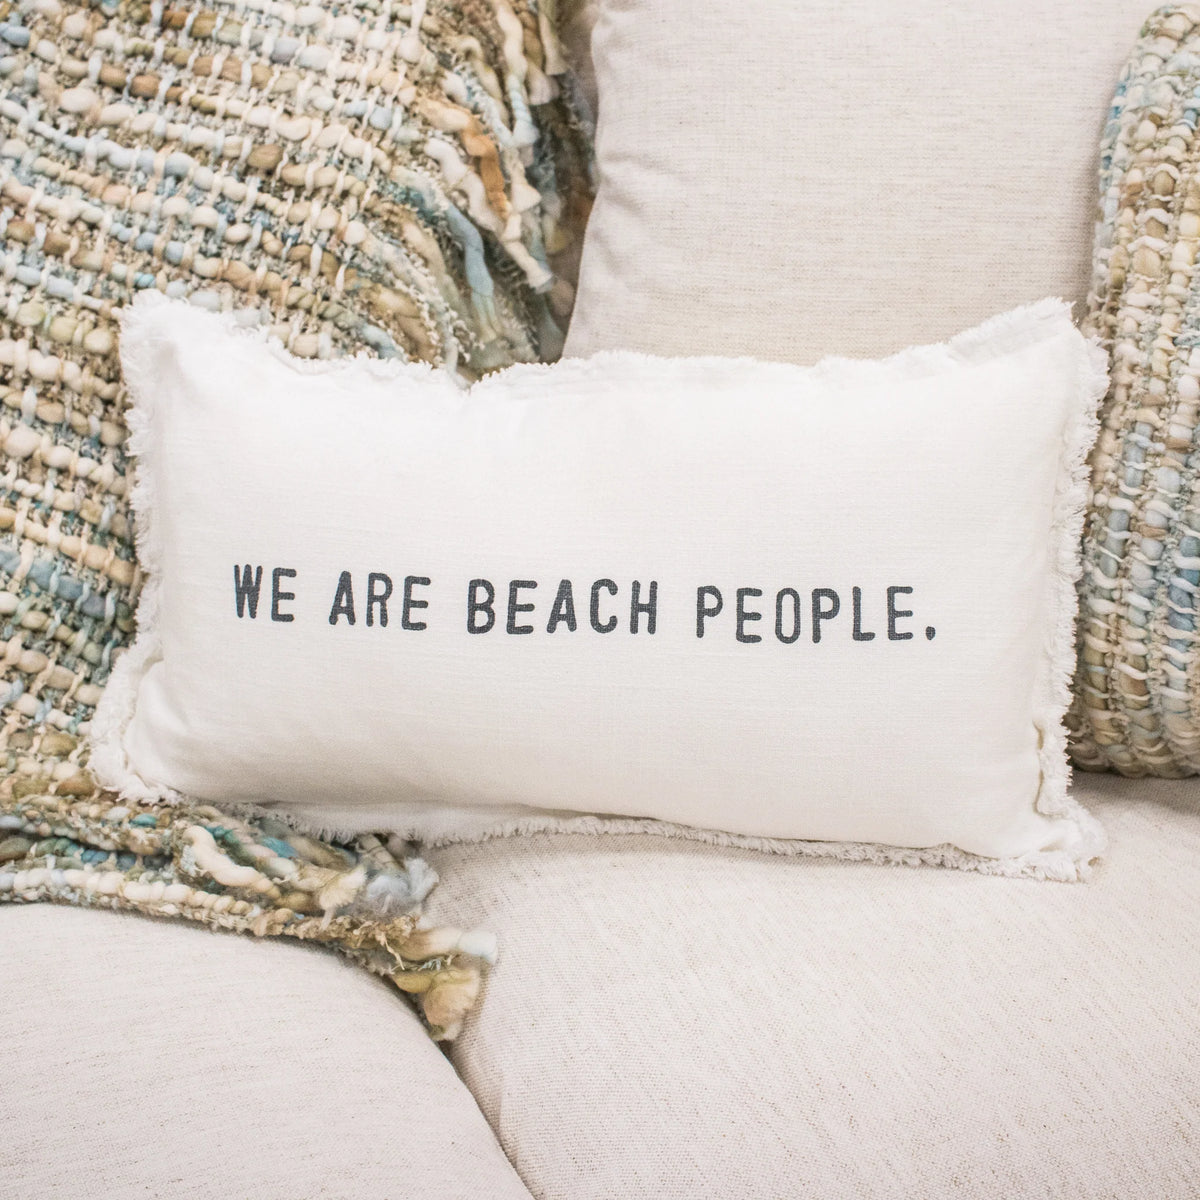 We Are Beach People Throw Pillow